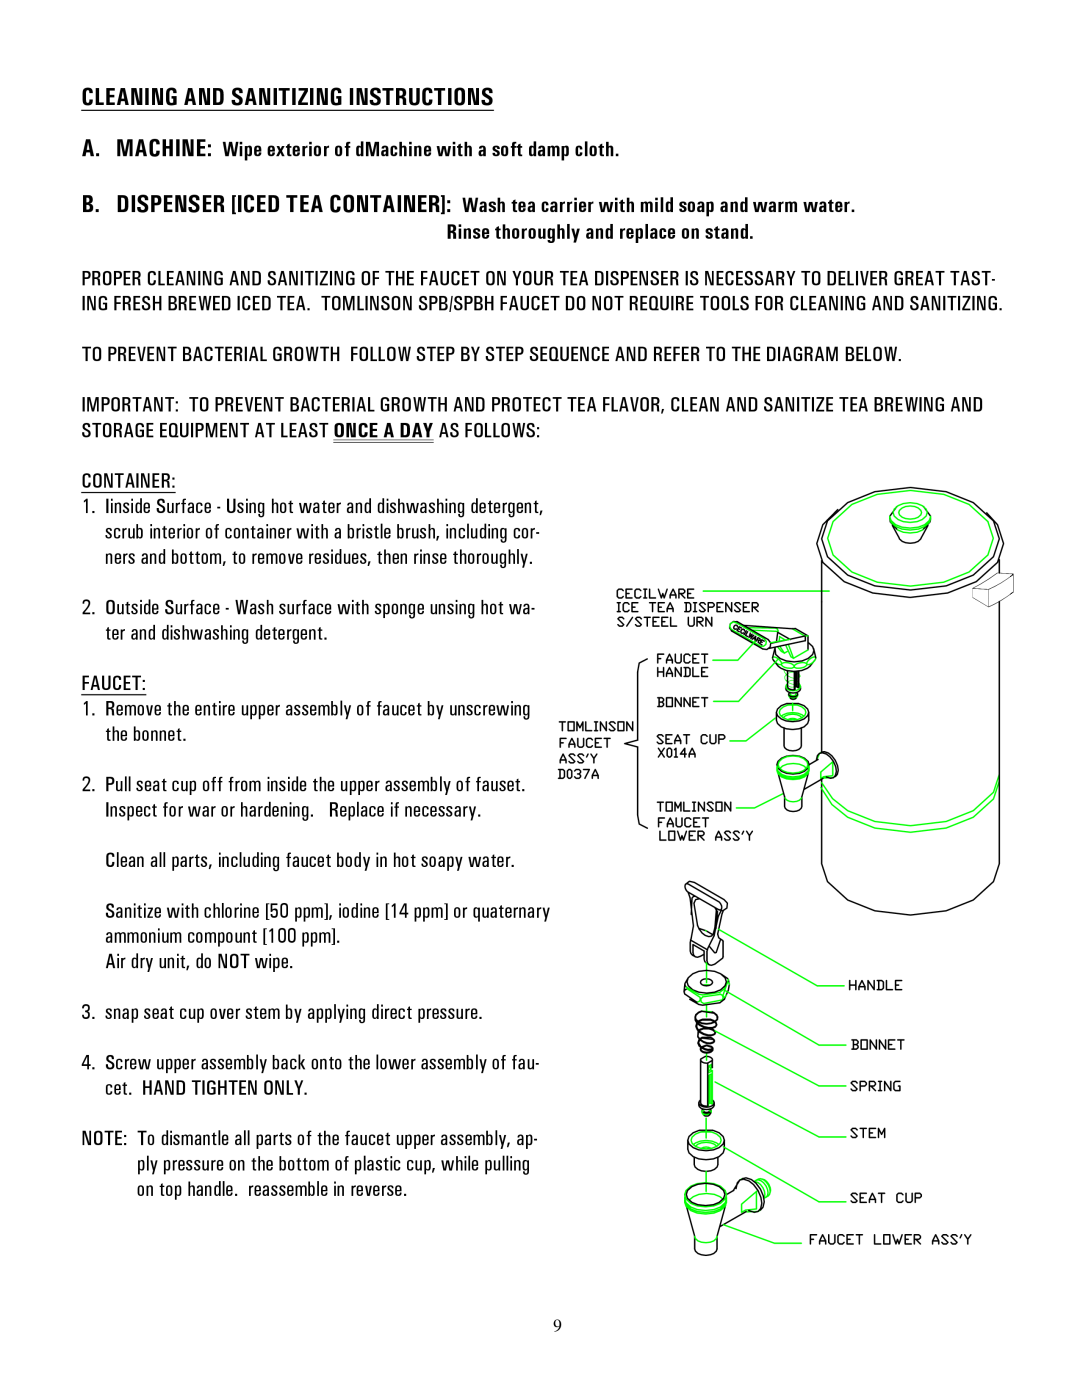 Cecilware FTC-10, FTC-5 manual Cleaning And Sanitizing Instructions 